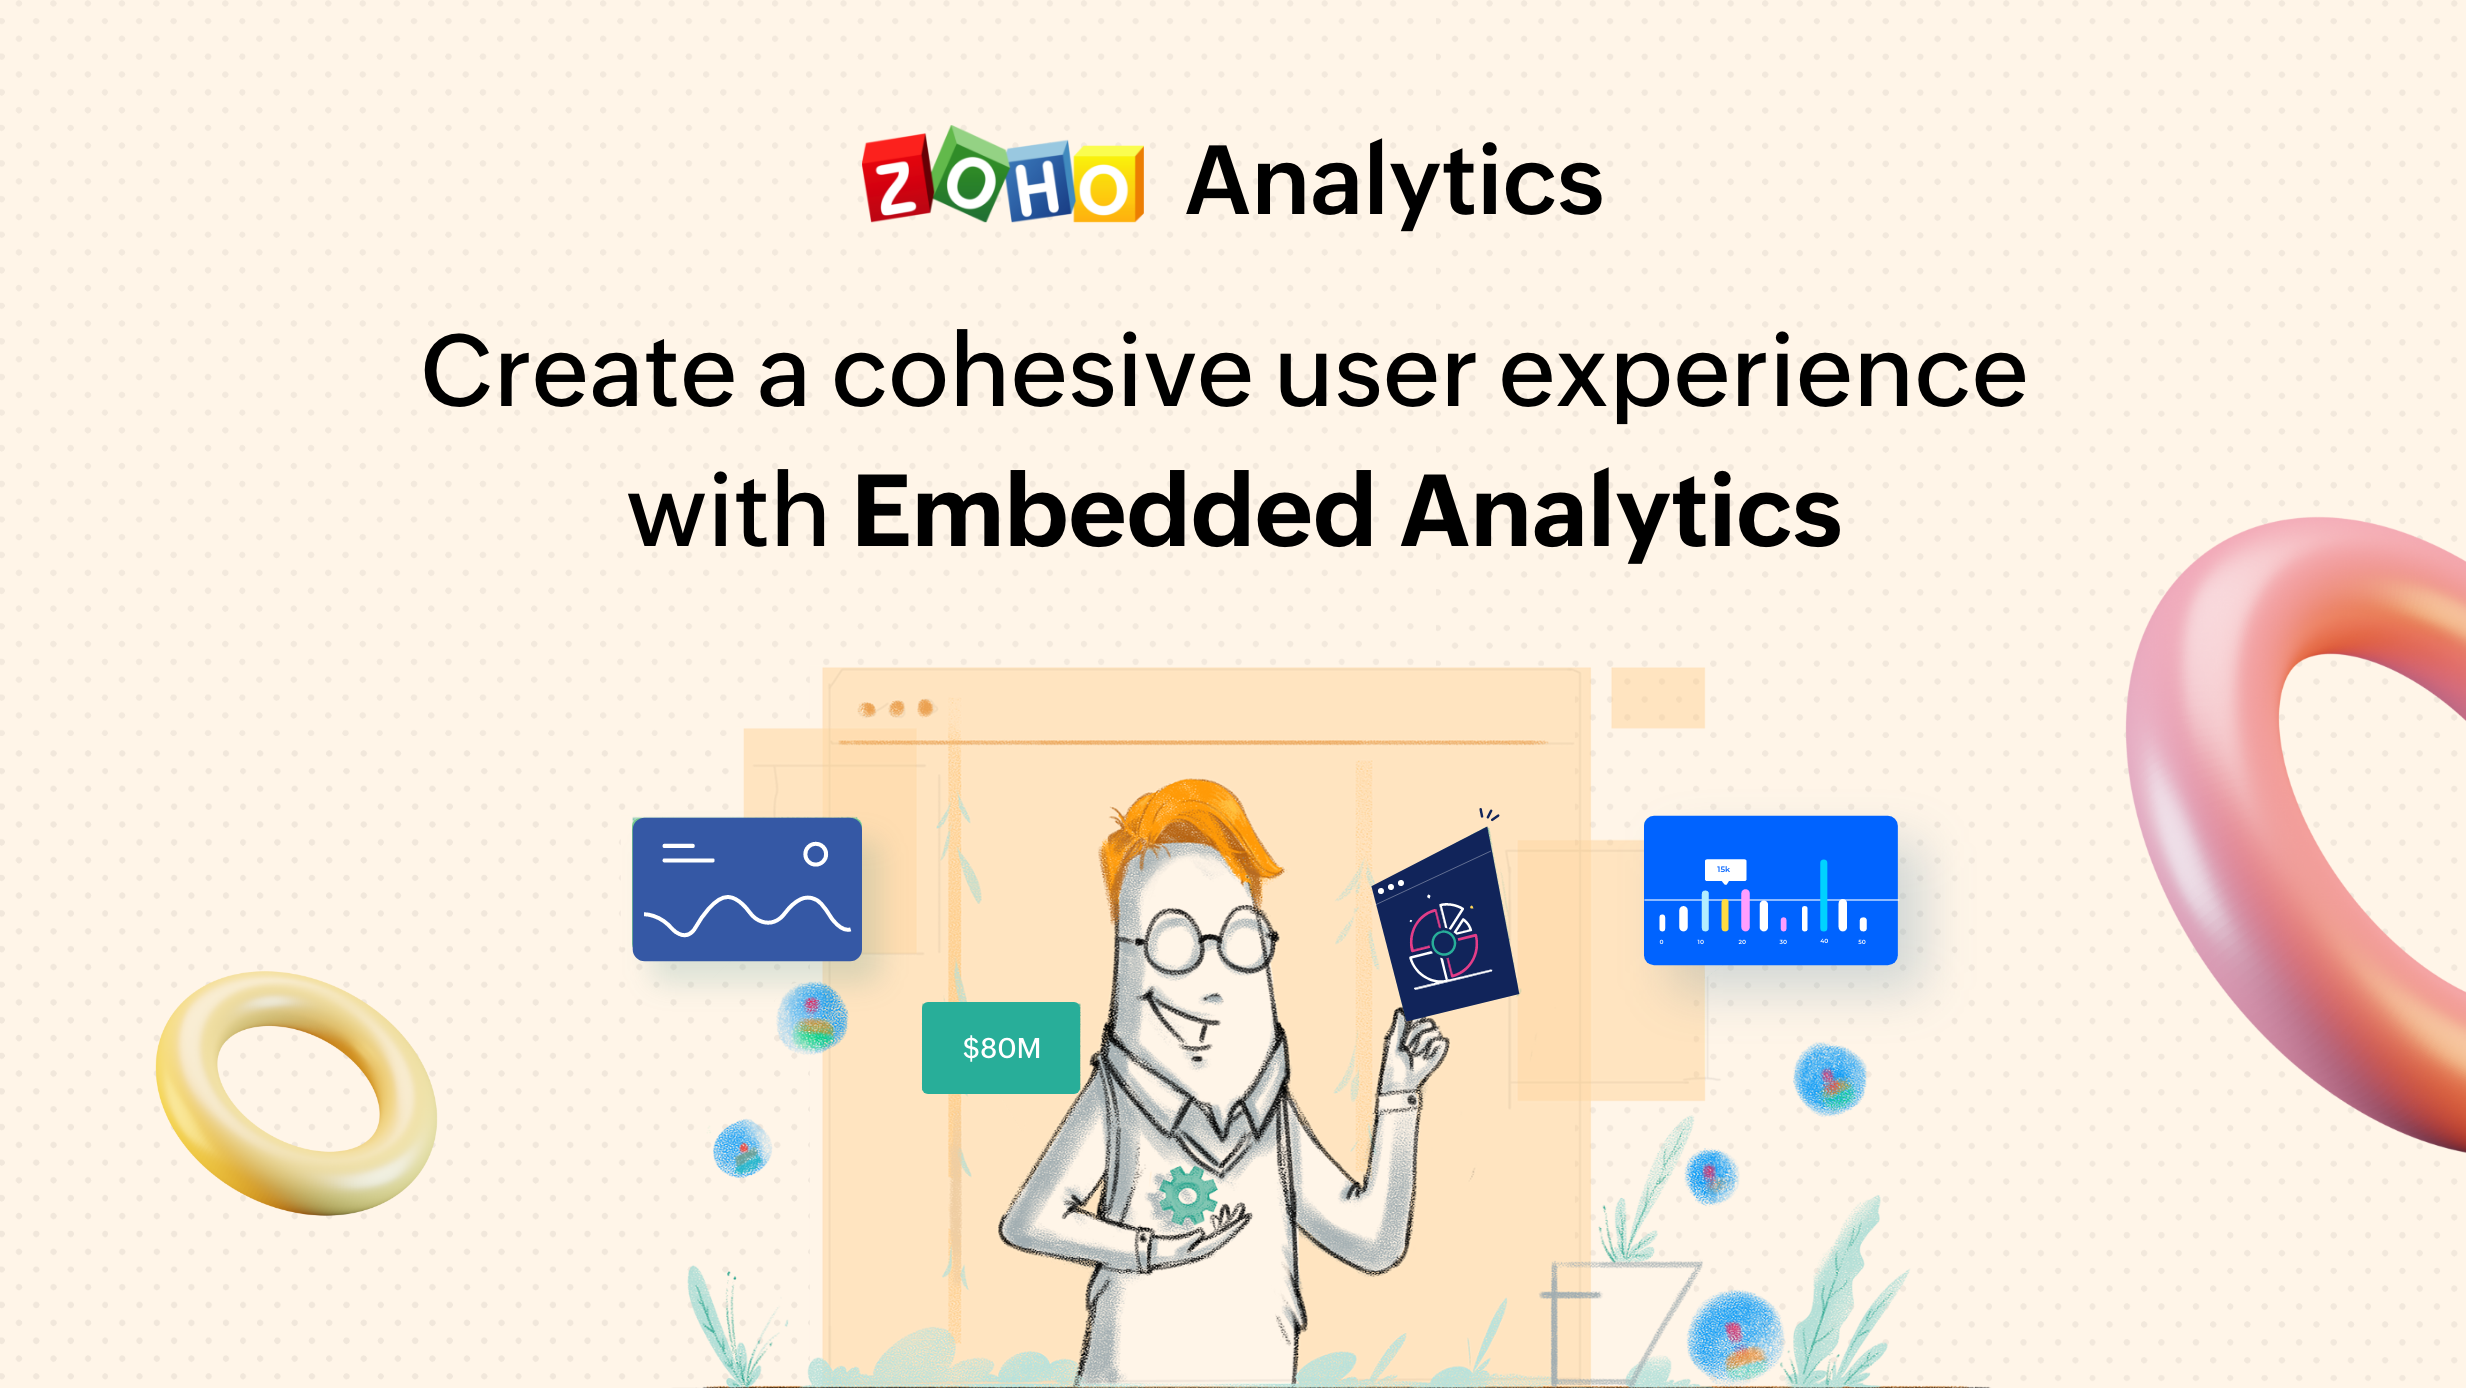 Create a cohesive user experience with embedded analytics